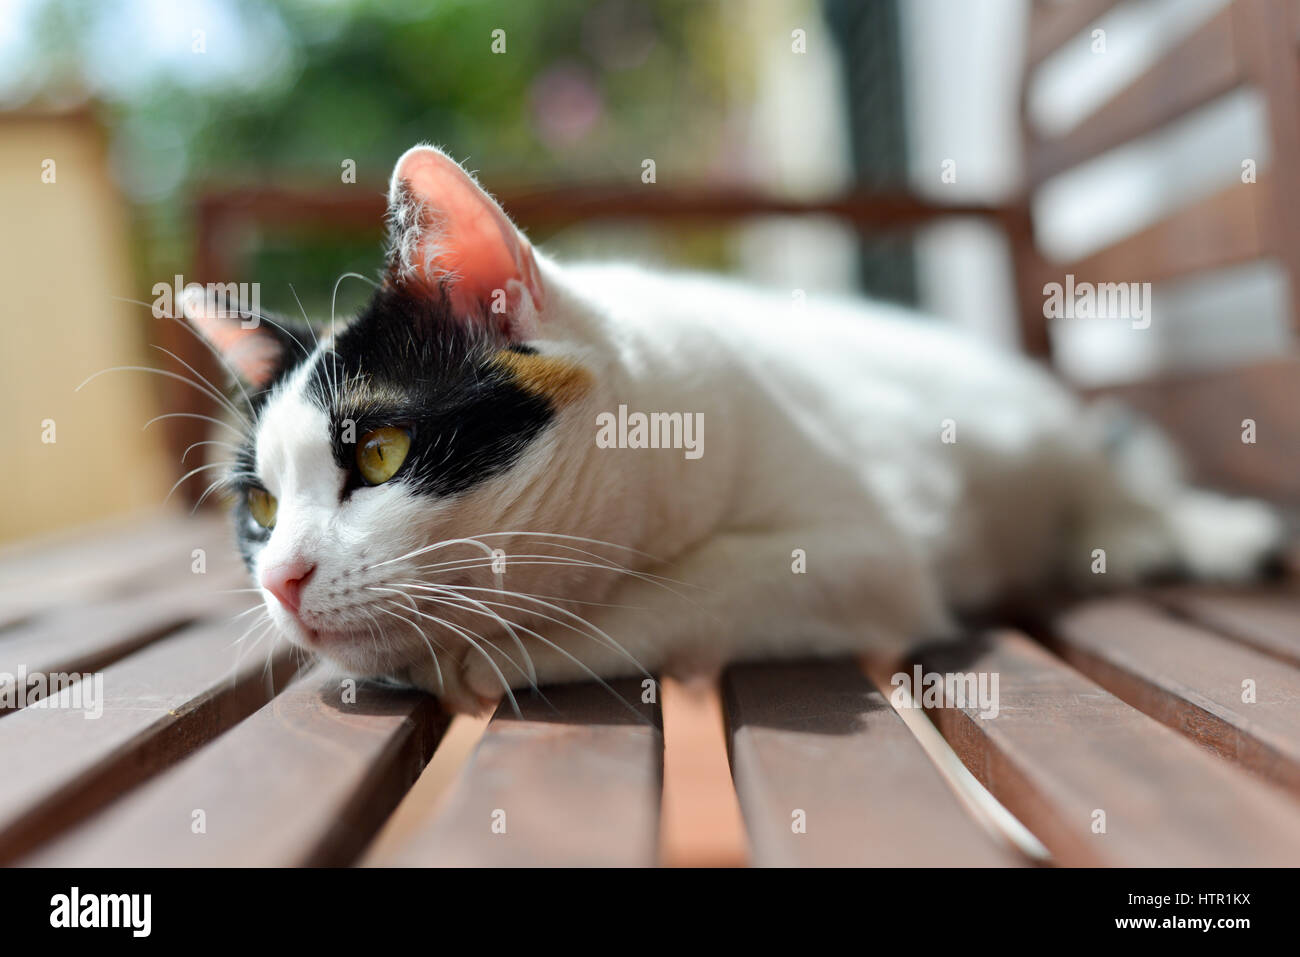 ever seen a cat thinking? Stock Photo